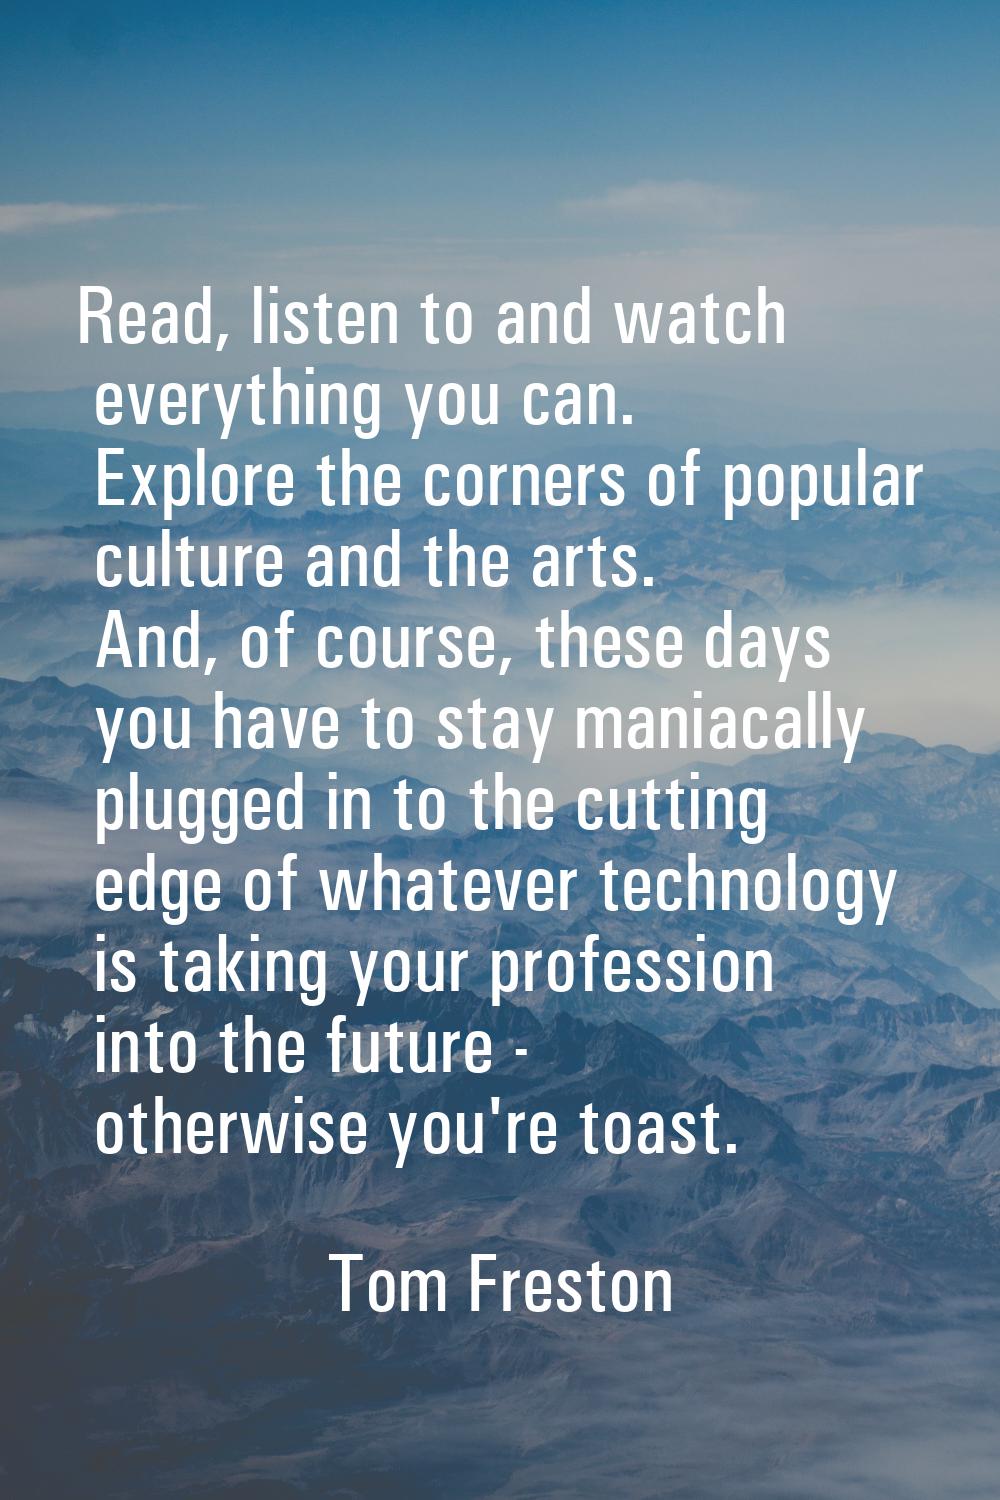 Read, listen to and watch everything you can. Explore the corners of popular culture and the arts. 